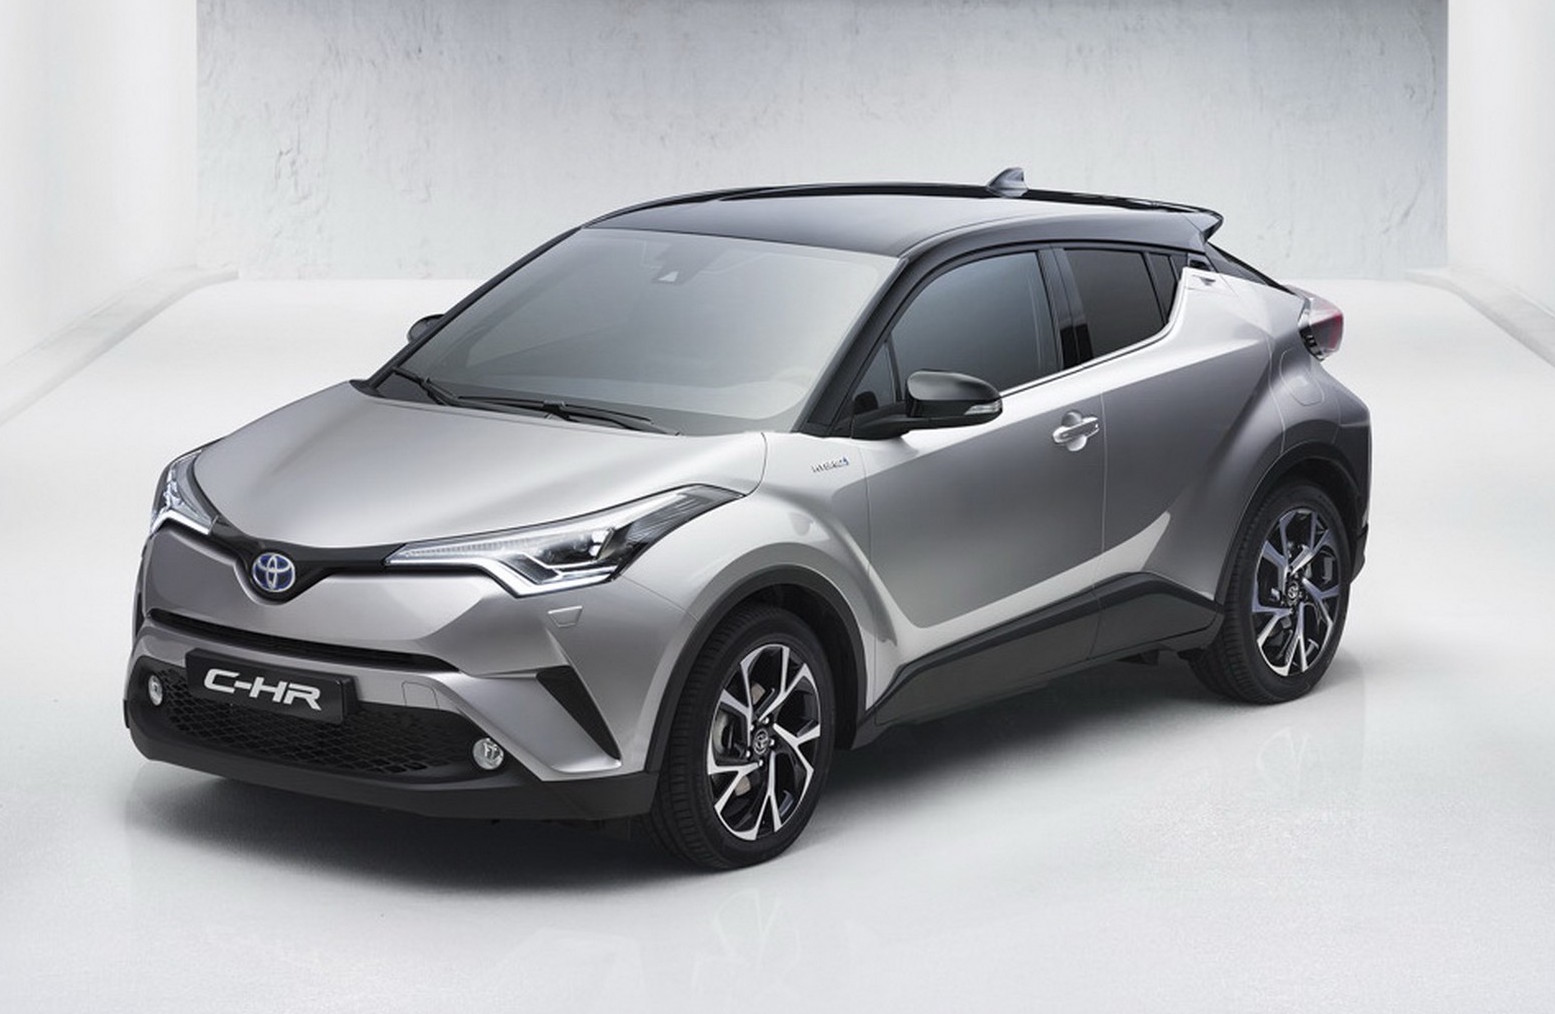 Toyota CHR production compact SUV leaks out early  PerformanceDrive